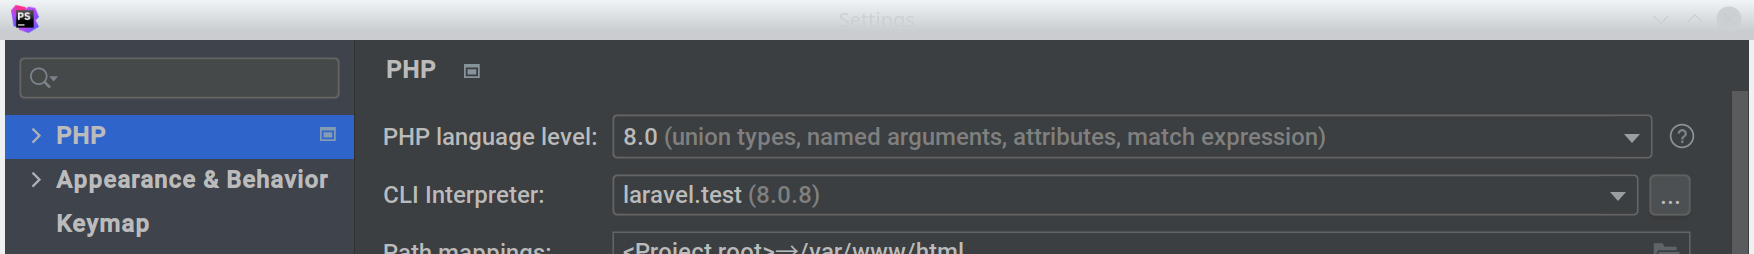 The PHP section of PHPStorm Settings.